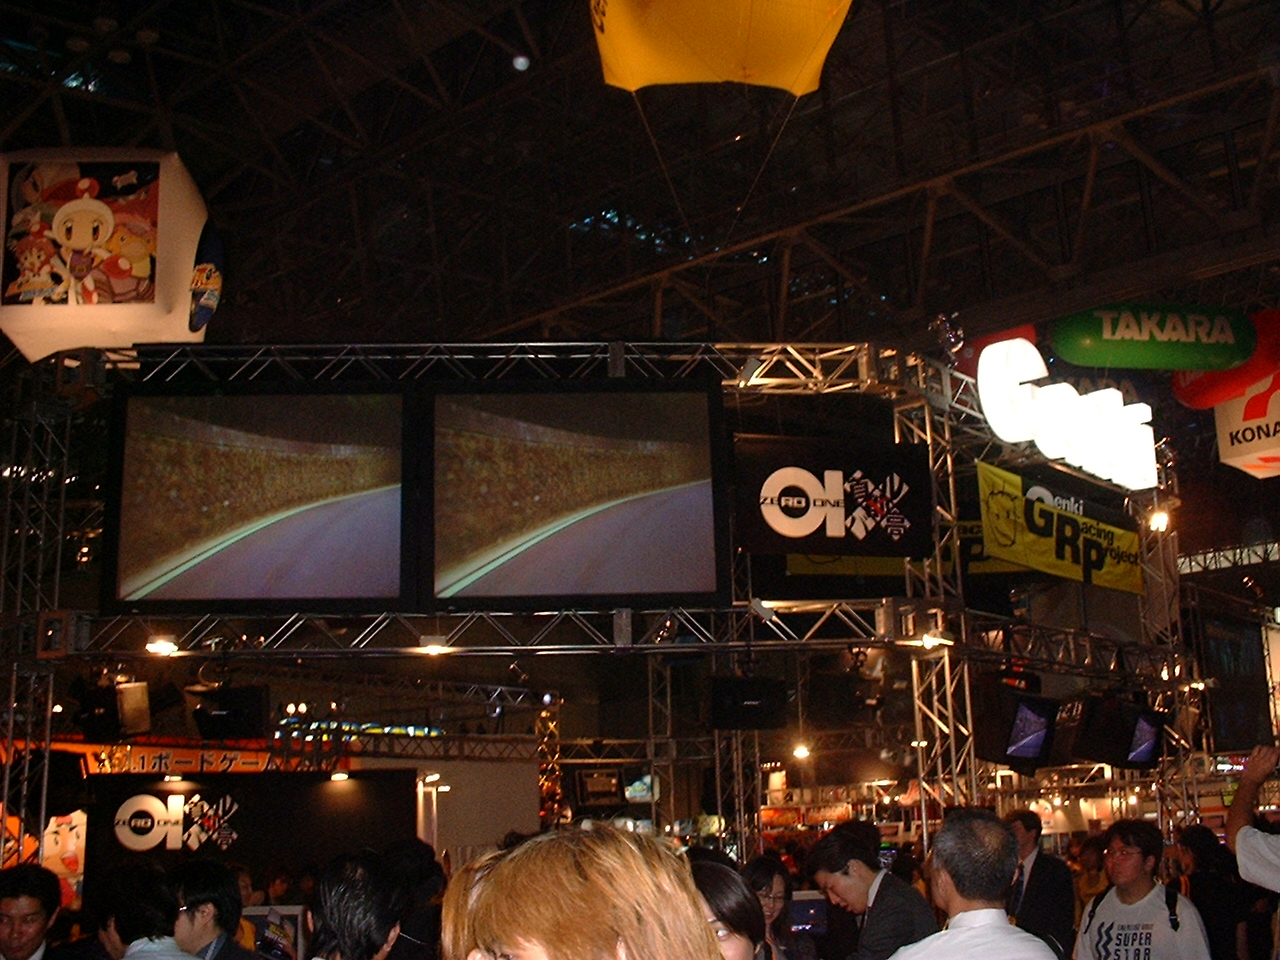 a crowd of people around the Genki booth showing a racing game